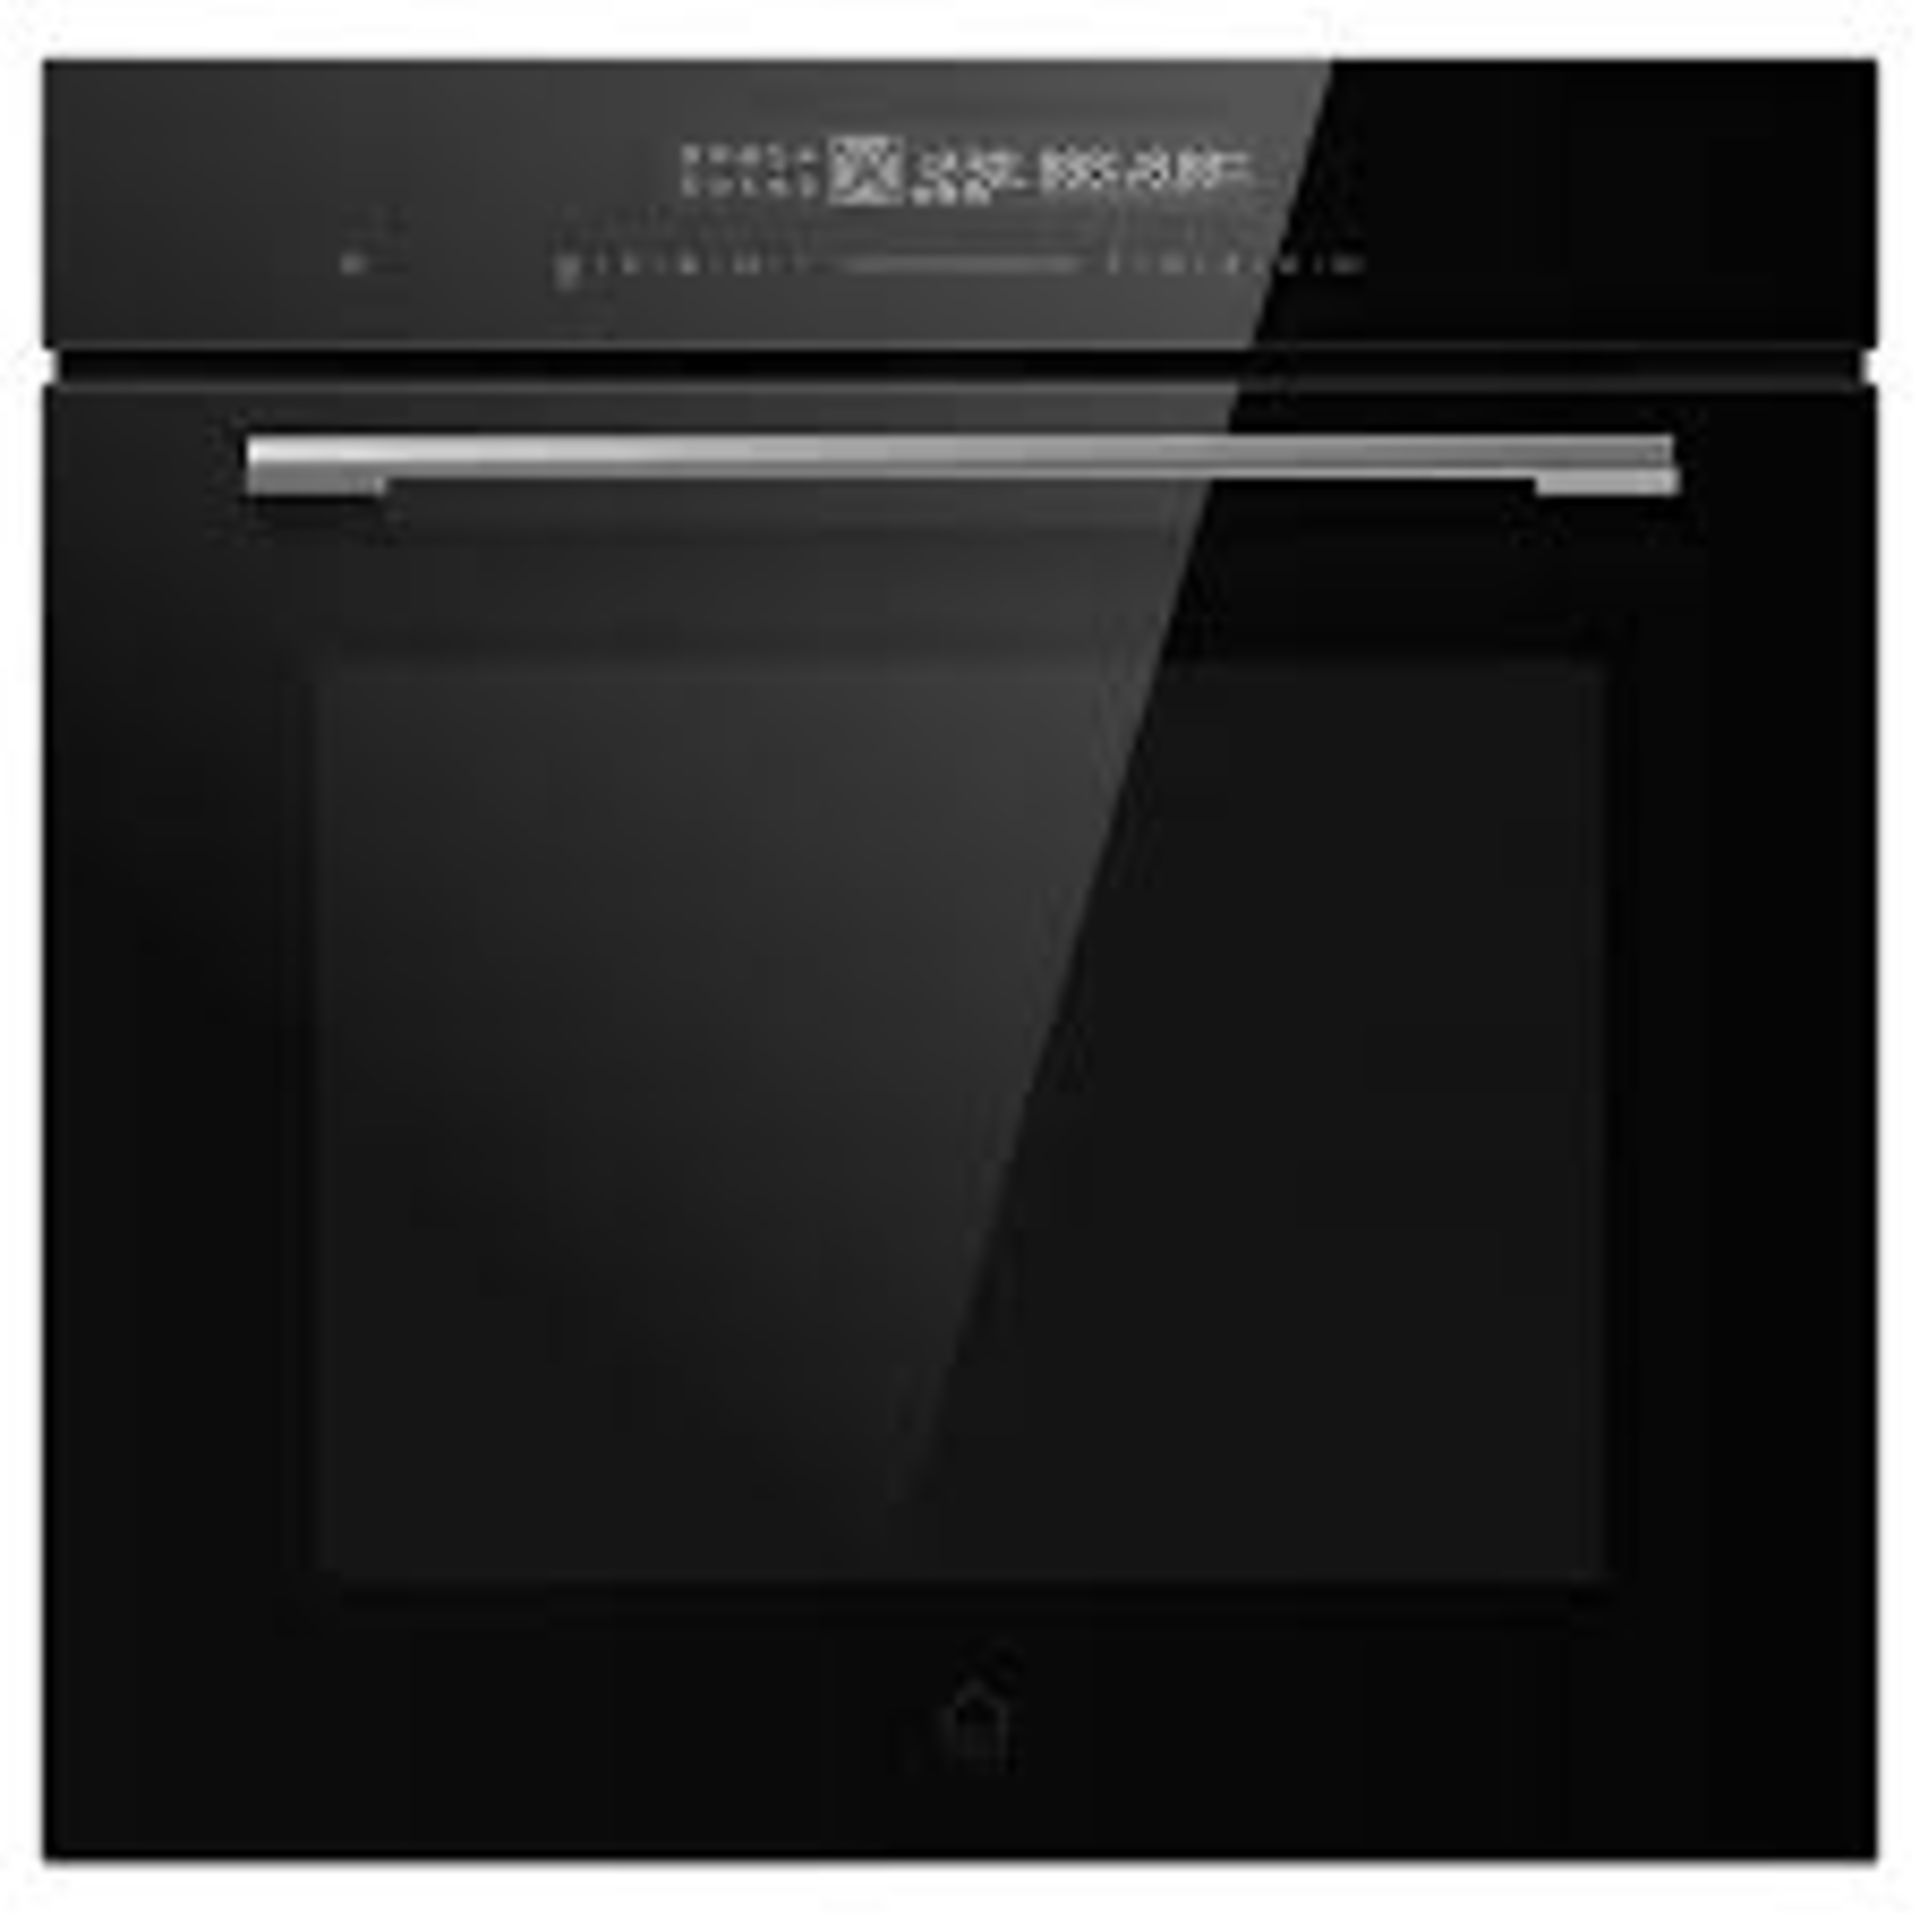 GoodHome GHMOVTC72 Built-in Single Multifunction Oven - Gloss black. - ER44. RRP £426.00. Our